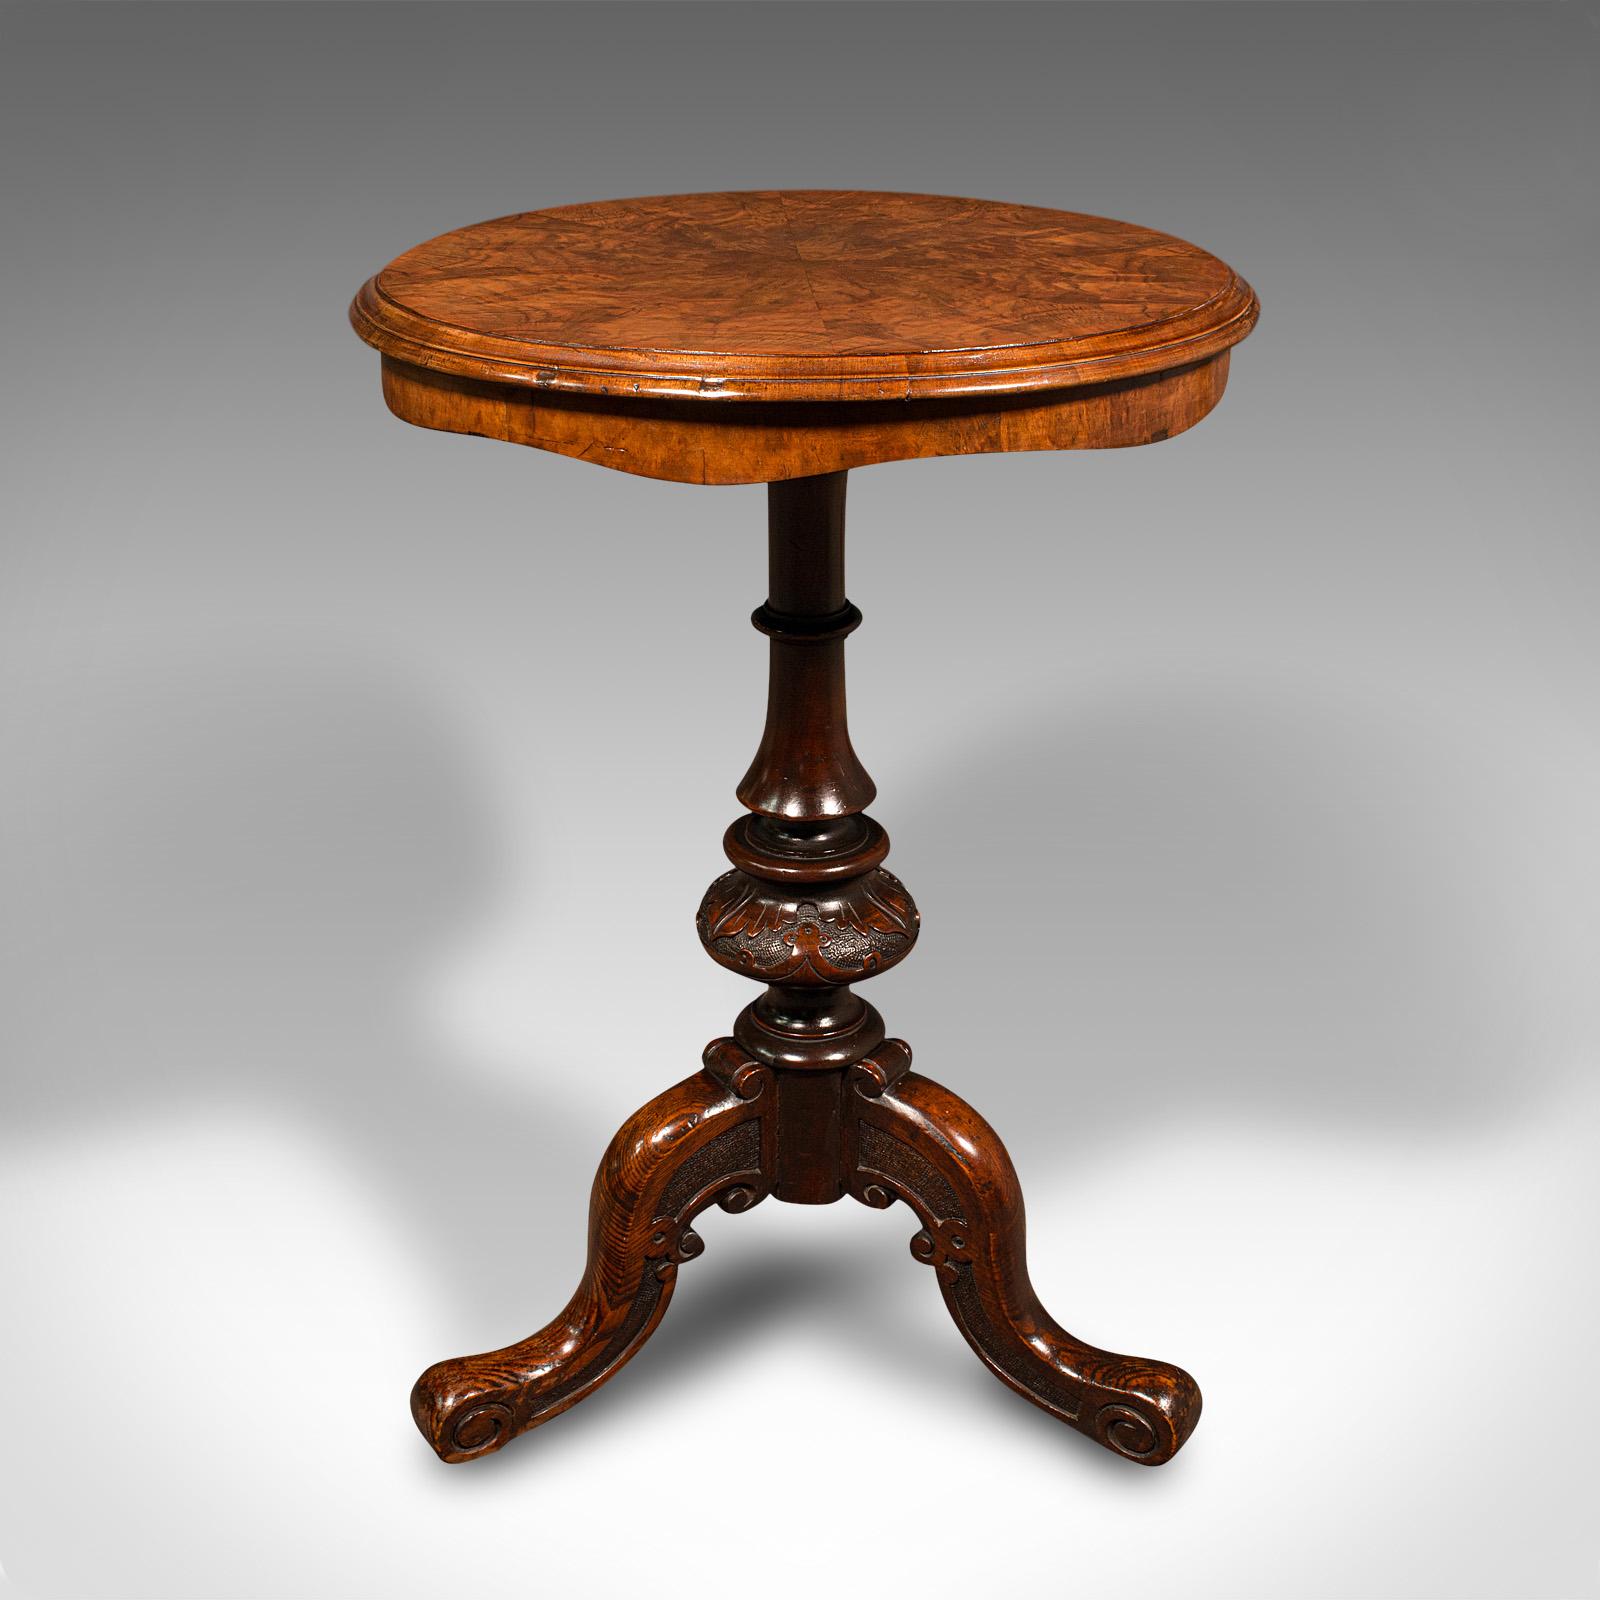 This is an antique lamp table. An English, burr walnut rotary top decorative occasional table, dating to the early Victorian period, circa 1840.

Accentuate any room with this striking circular table
Displays a desirable aged patina and in superb